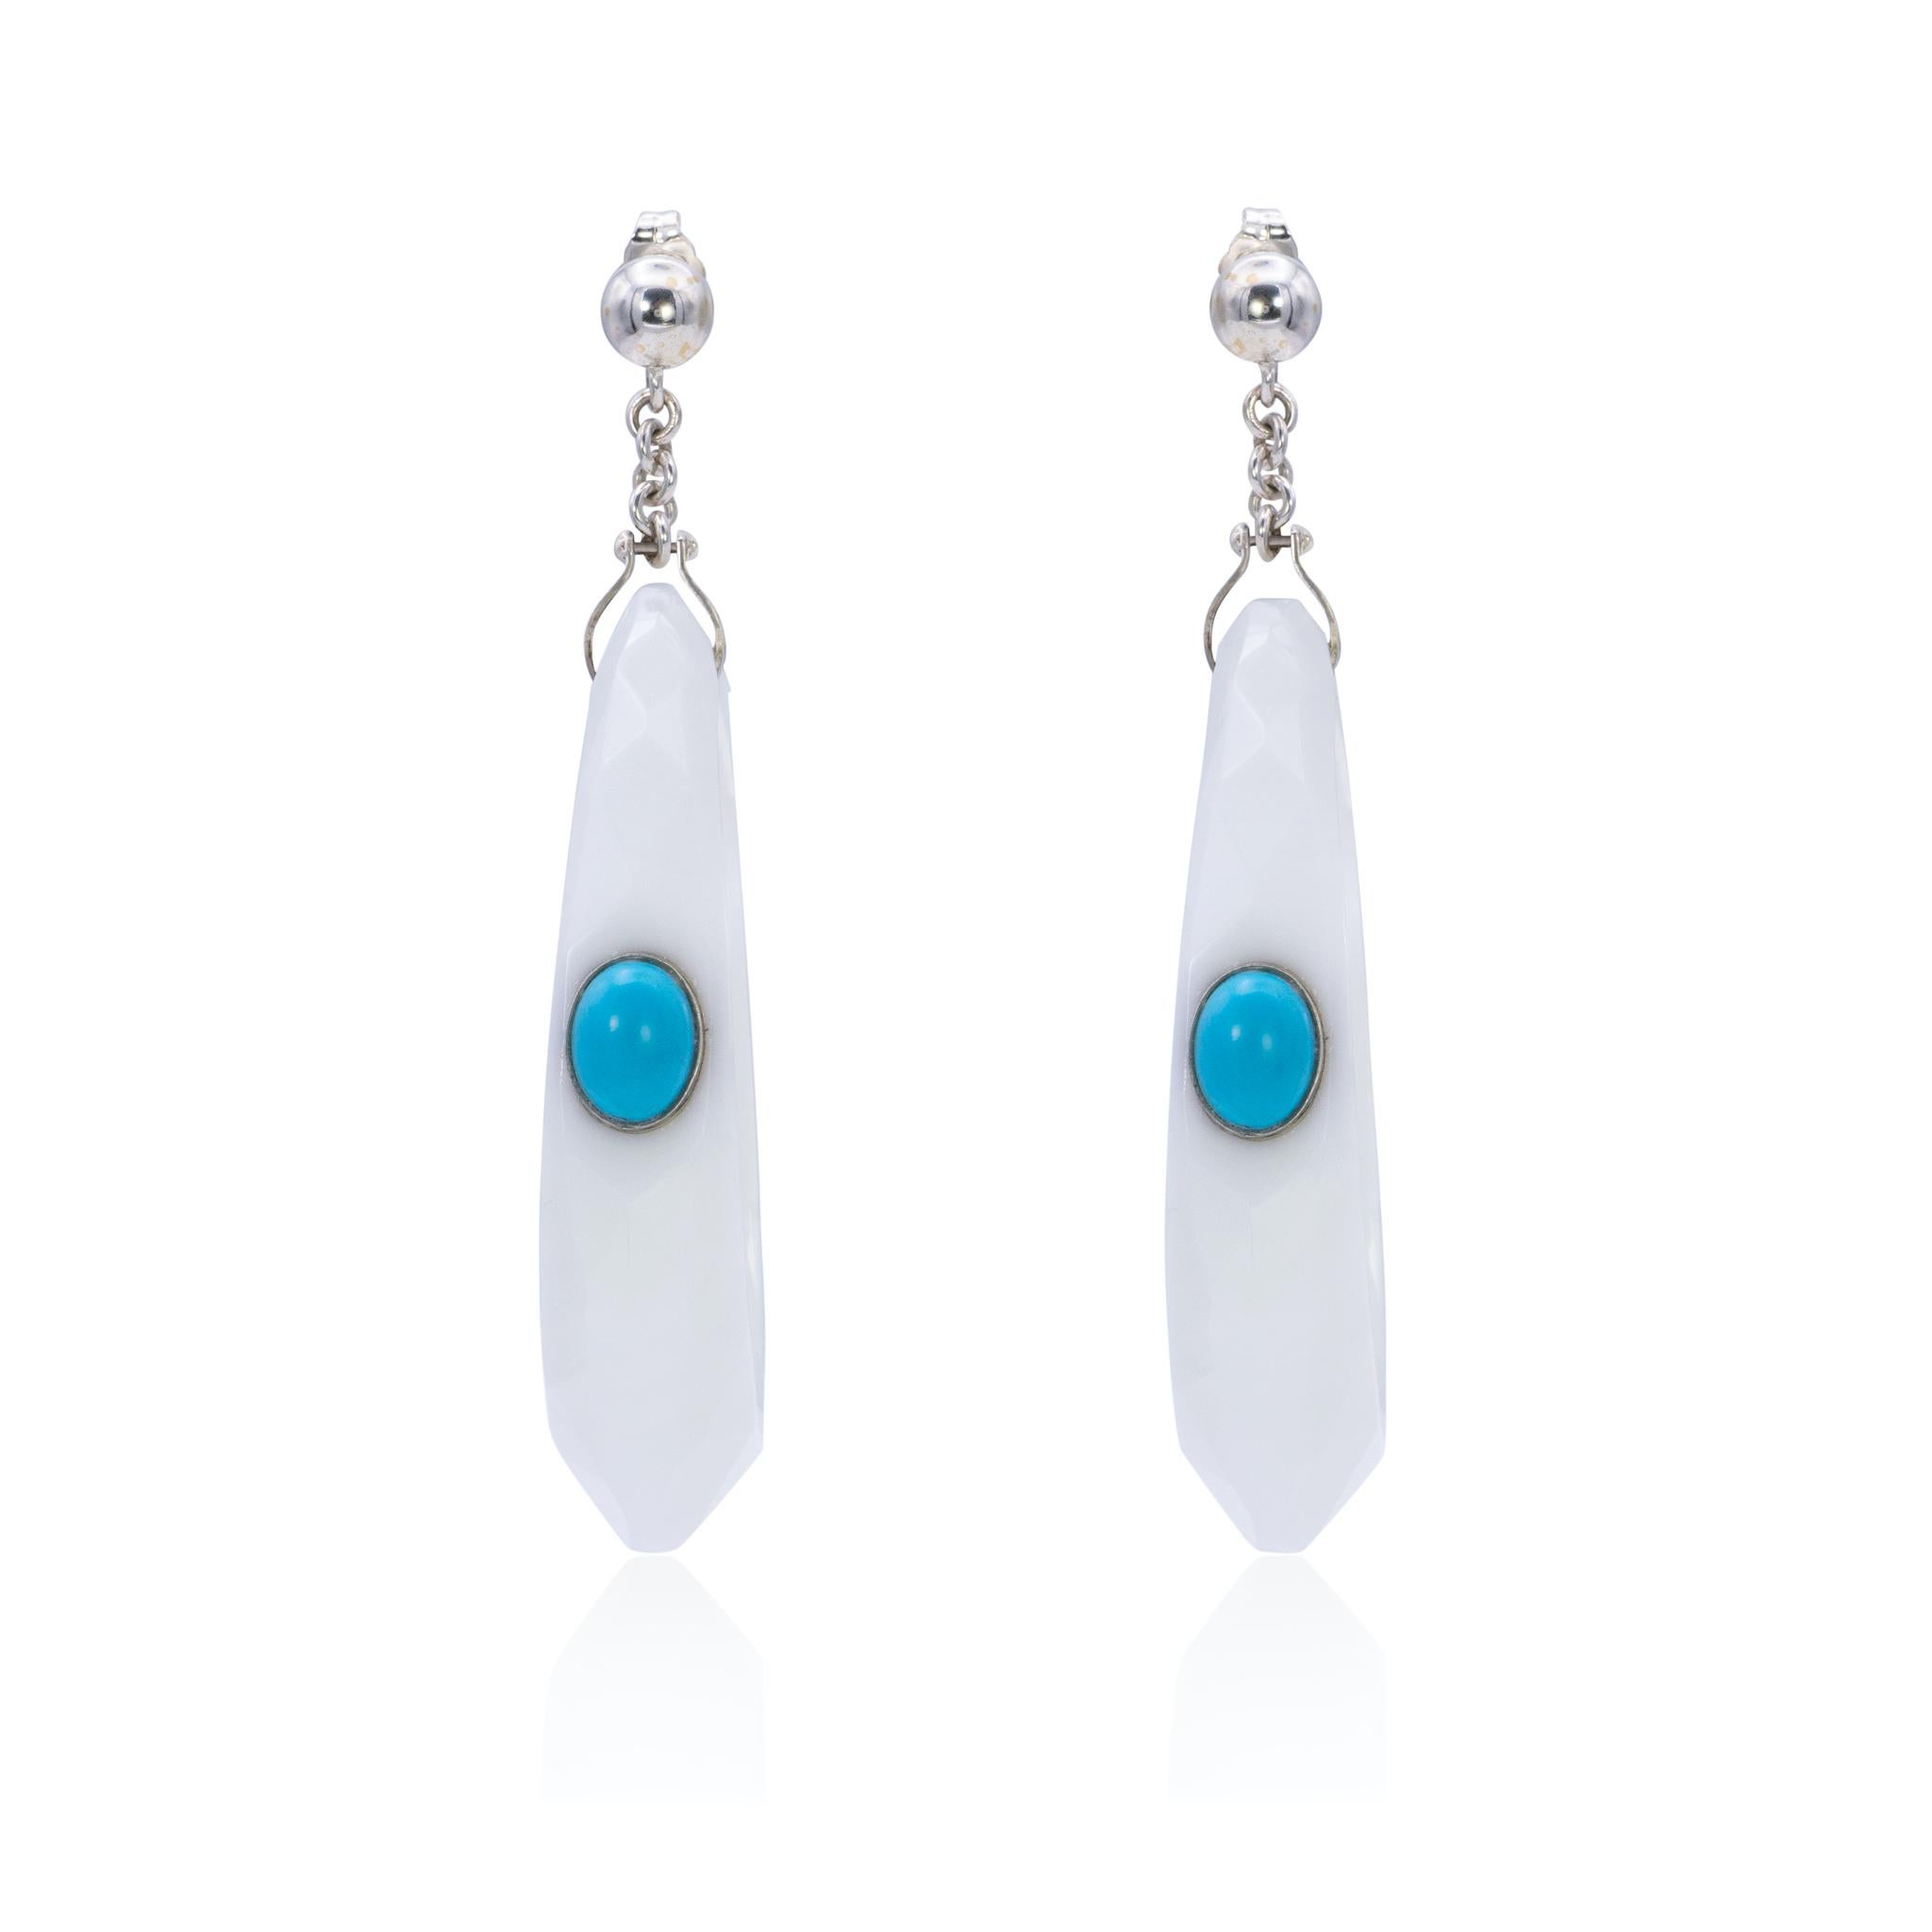 These fetching Cacholong Opal earrings with Turquoise created by Merideth McGregor of April in Paris Designs are sure to improve your day.  Cacholong Opal is a soothing, gentle, feminine stone and one that is ideal for sensitive people who may find